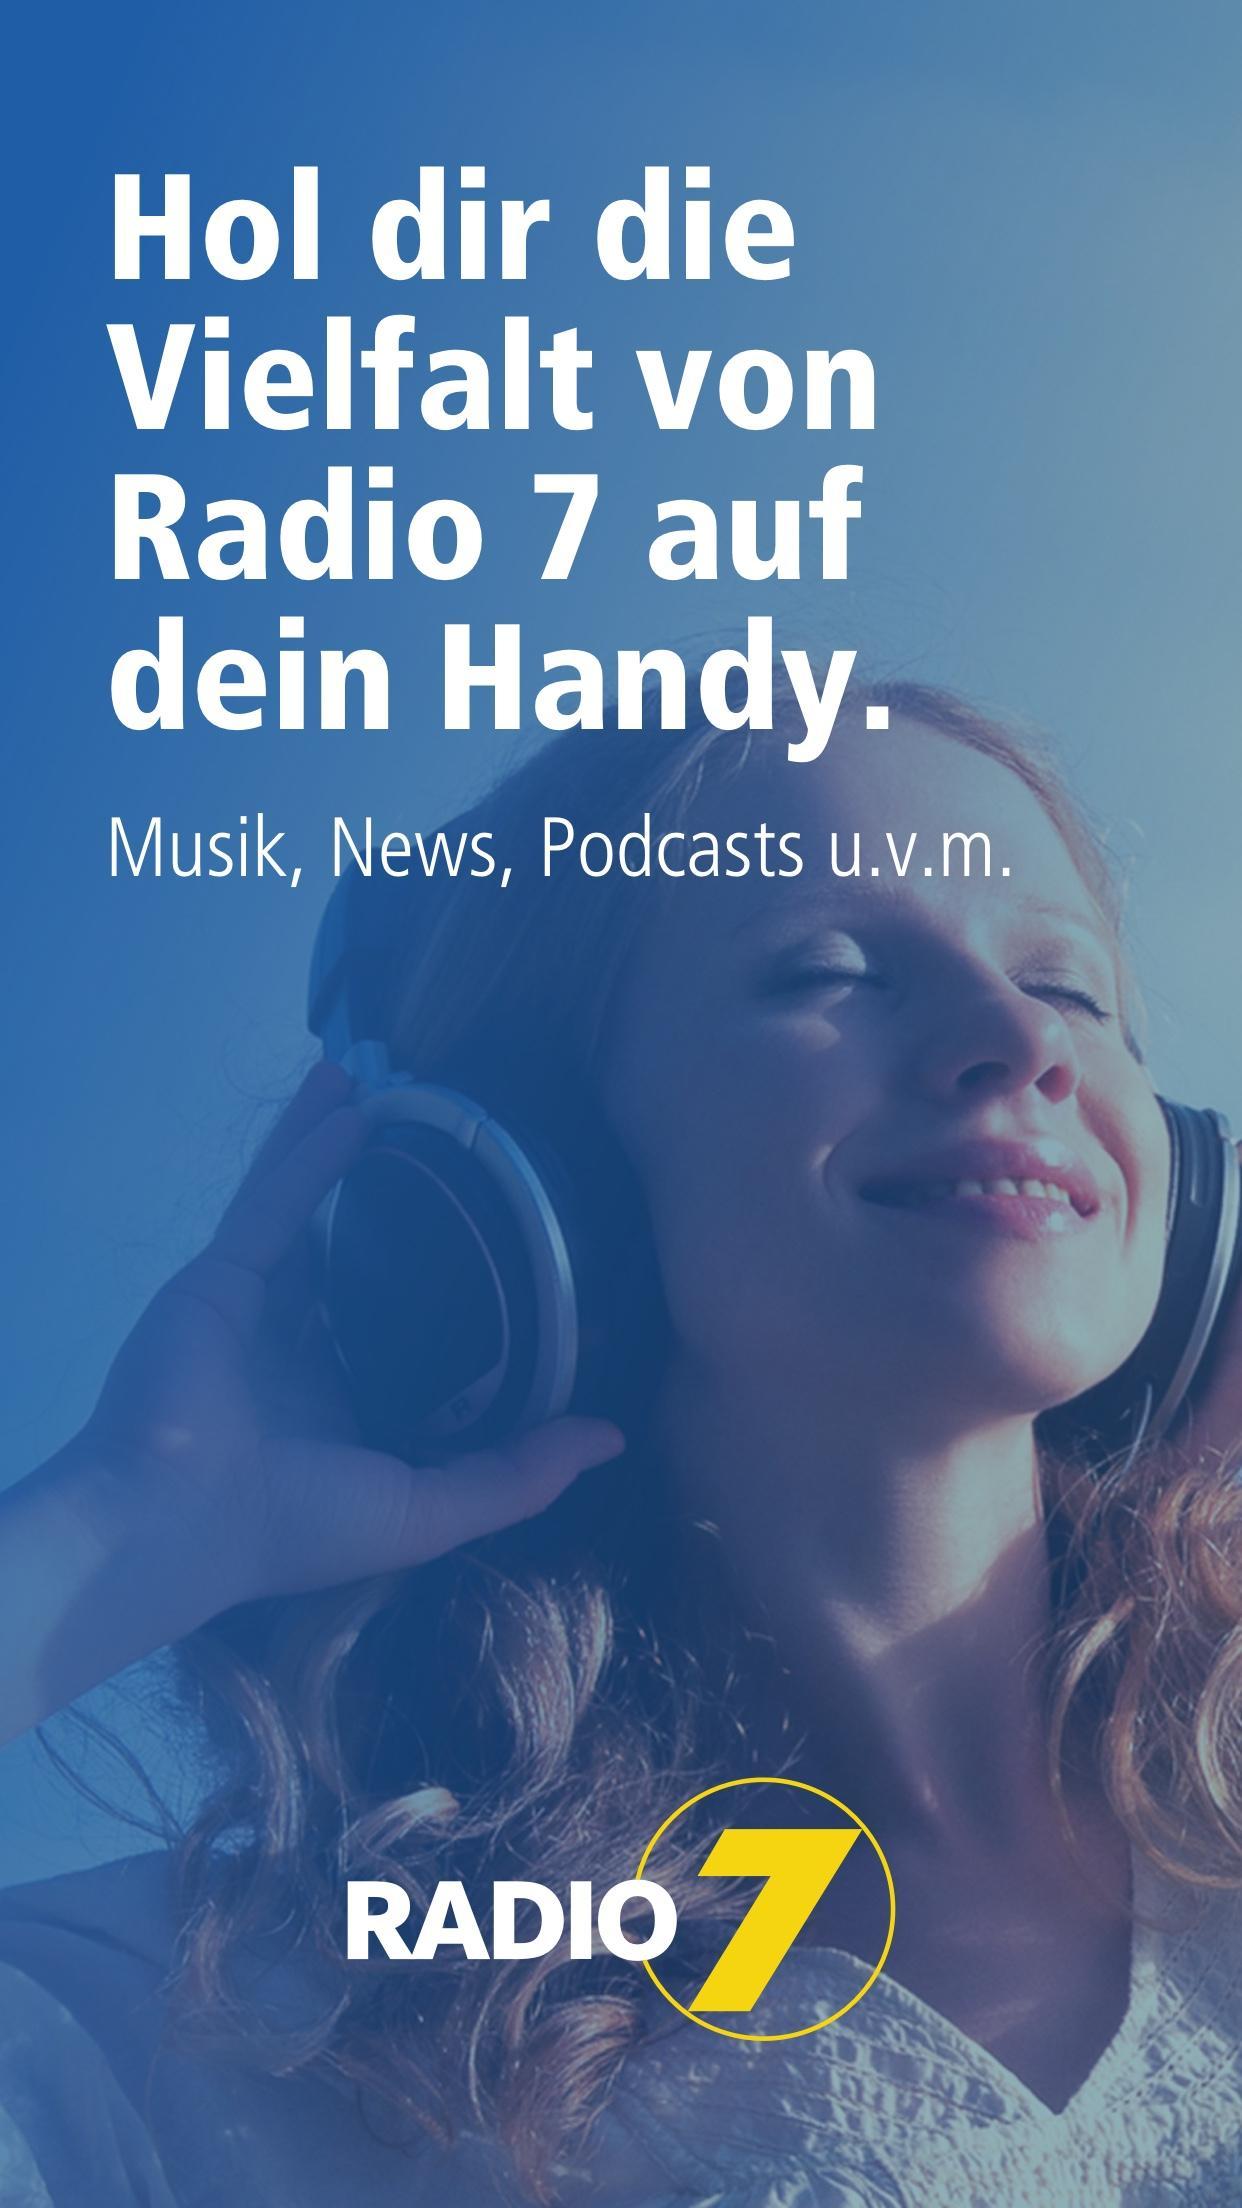 Radio 7 for Android - APK Download